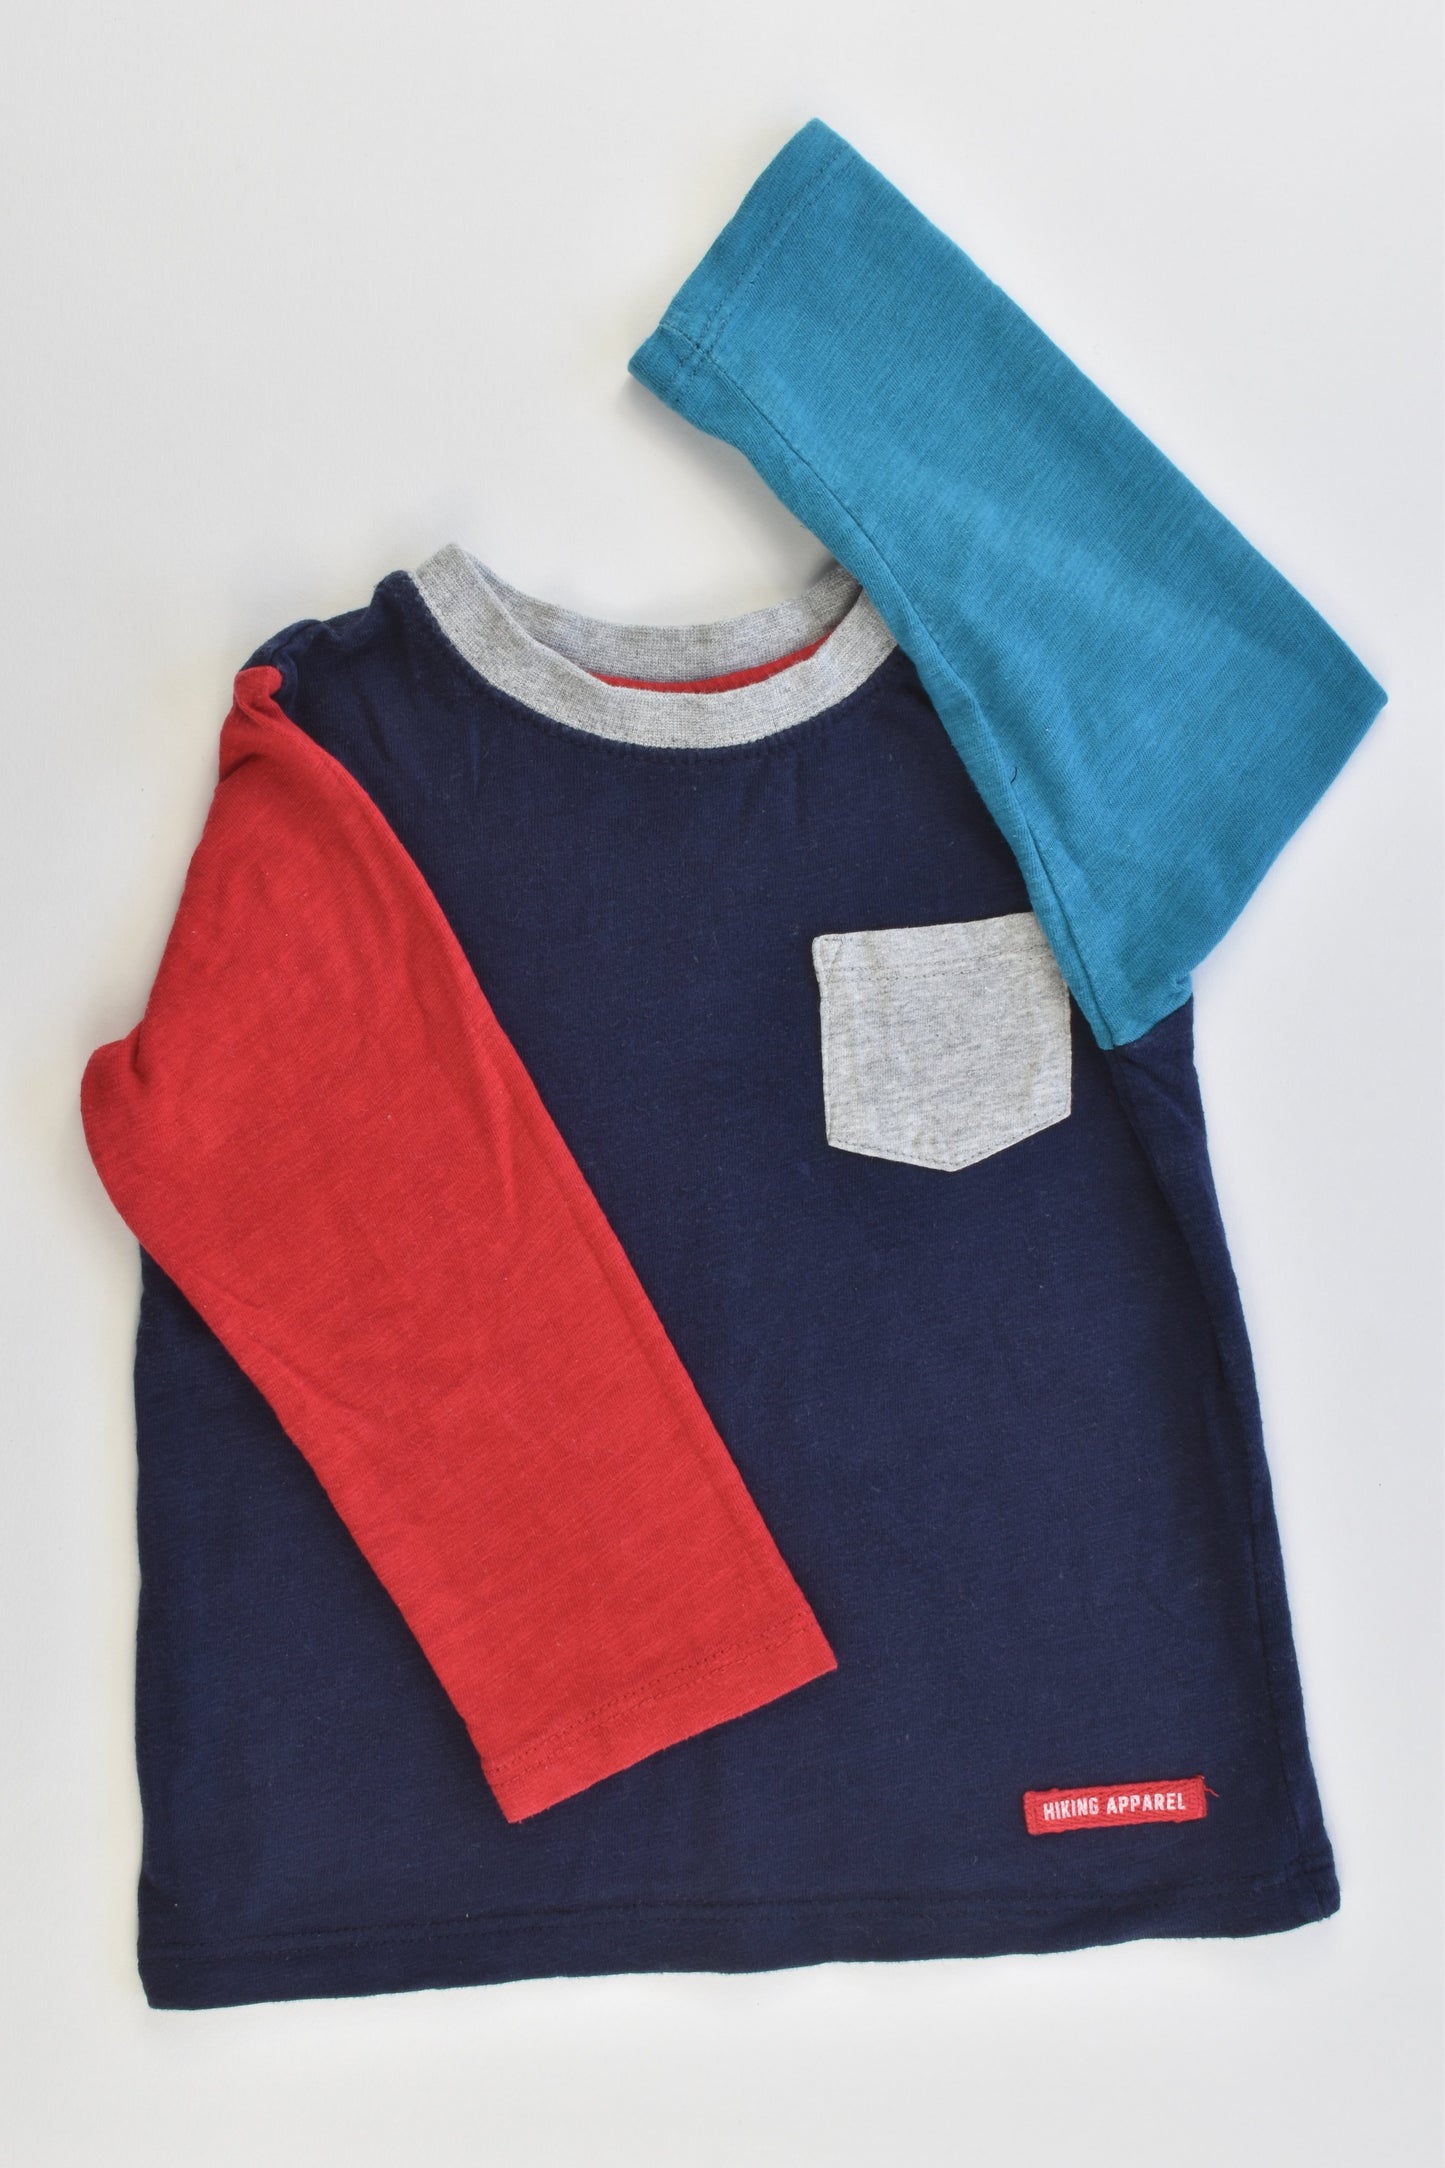 Target Size 1 (12-18 months) Top